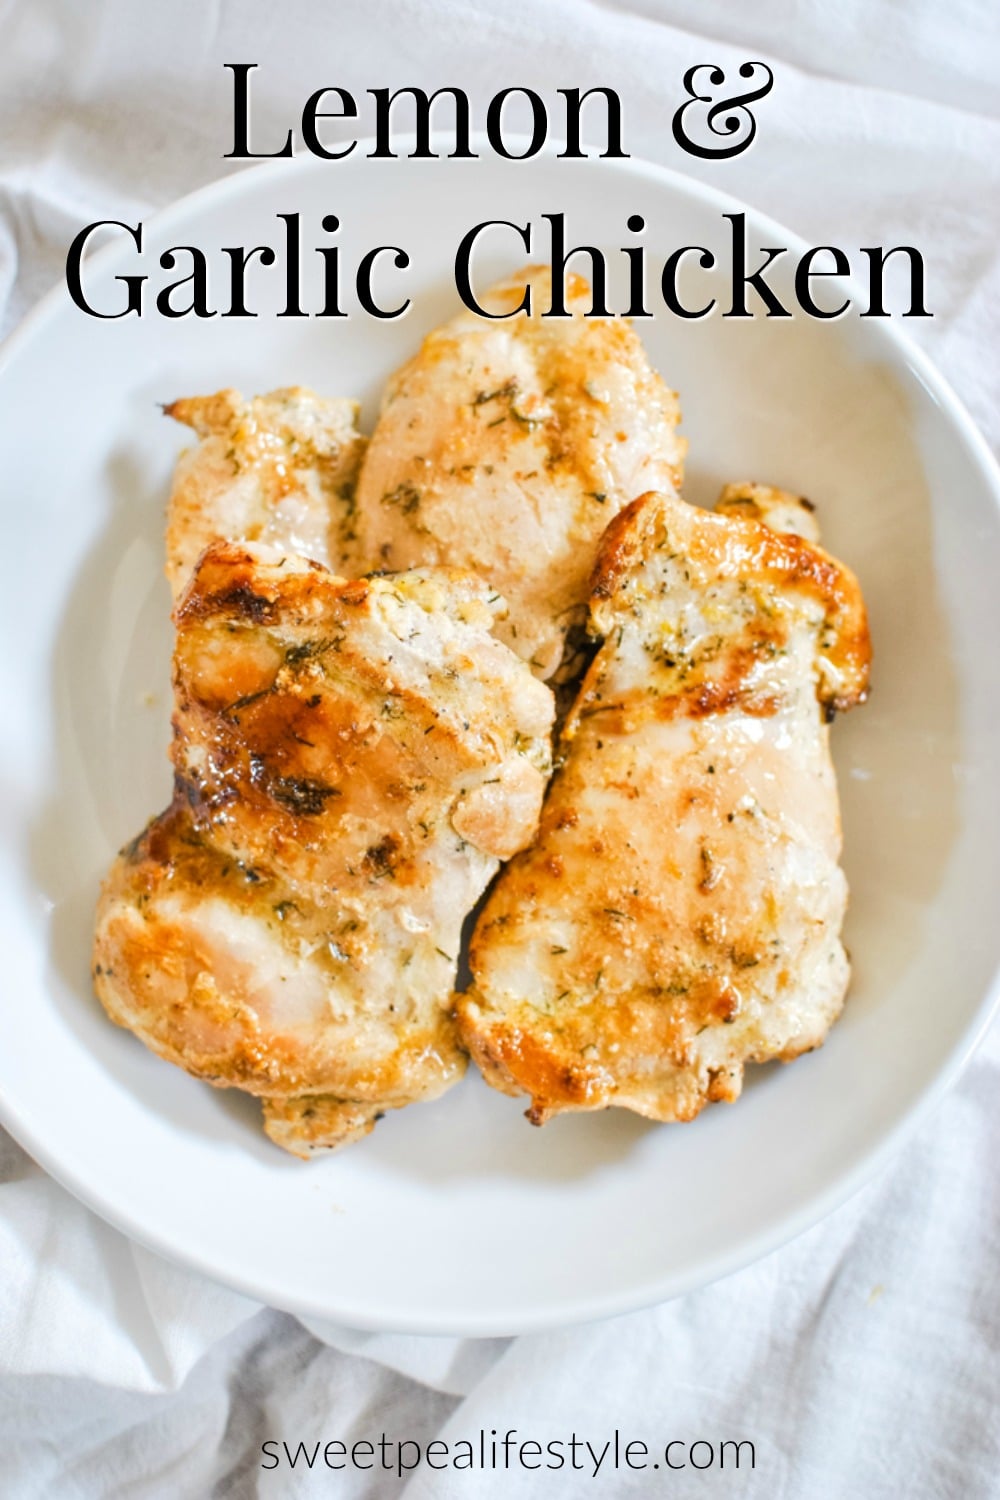 Lemon and Garlic Chicken Recipe from Sweetpea Lifestyle